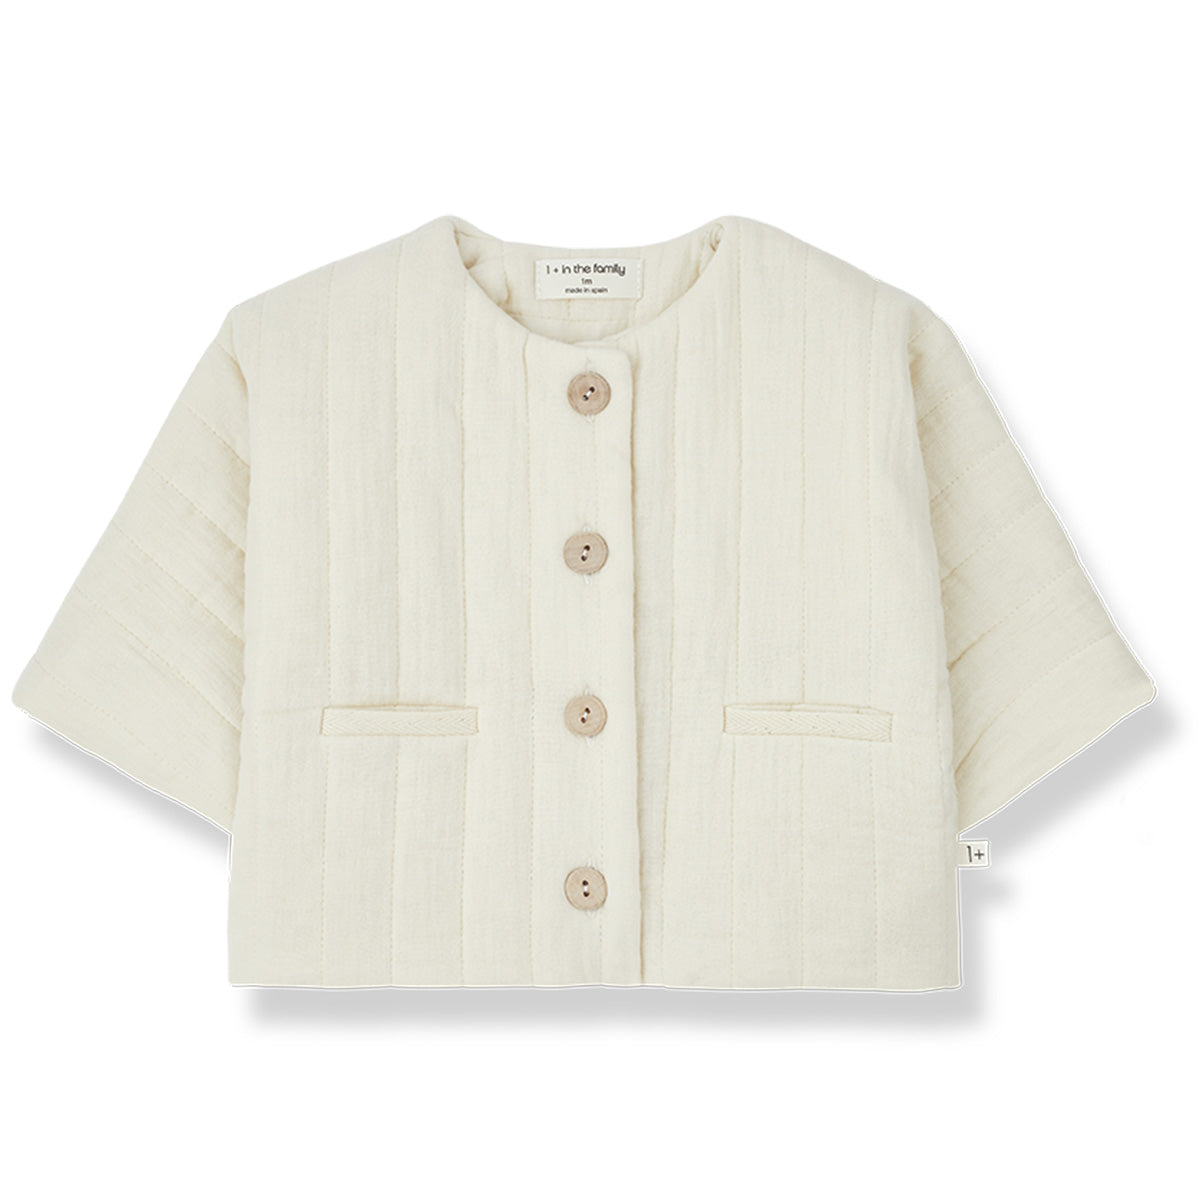 The Heidi Jacket from 1 + in the Family. A stylish and comfy new jacket for your little one